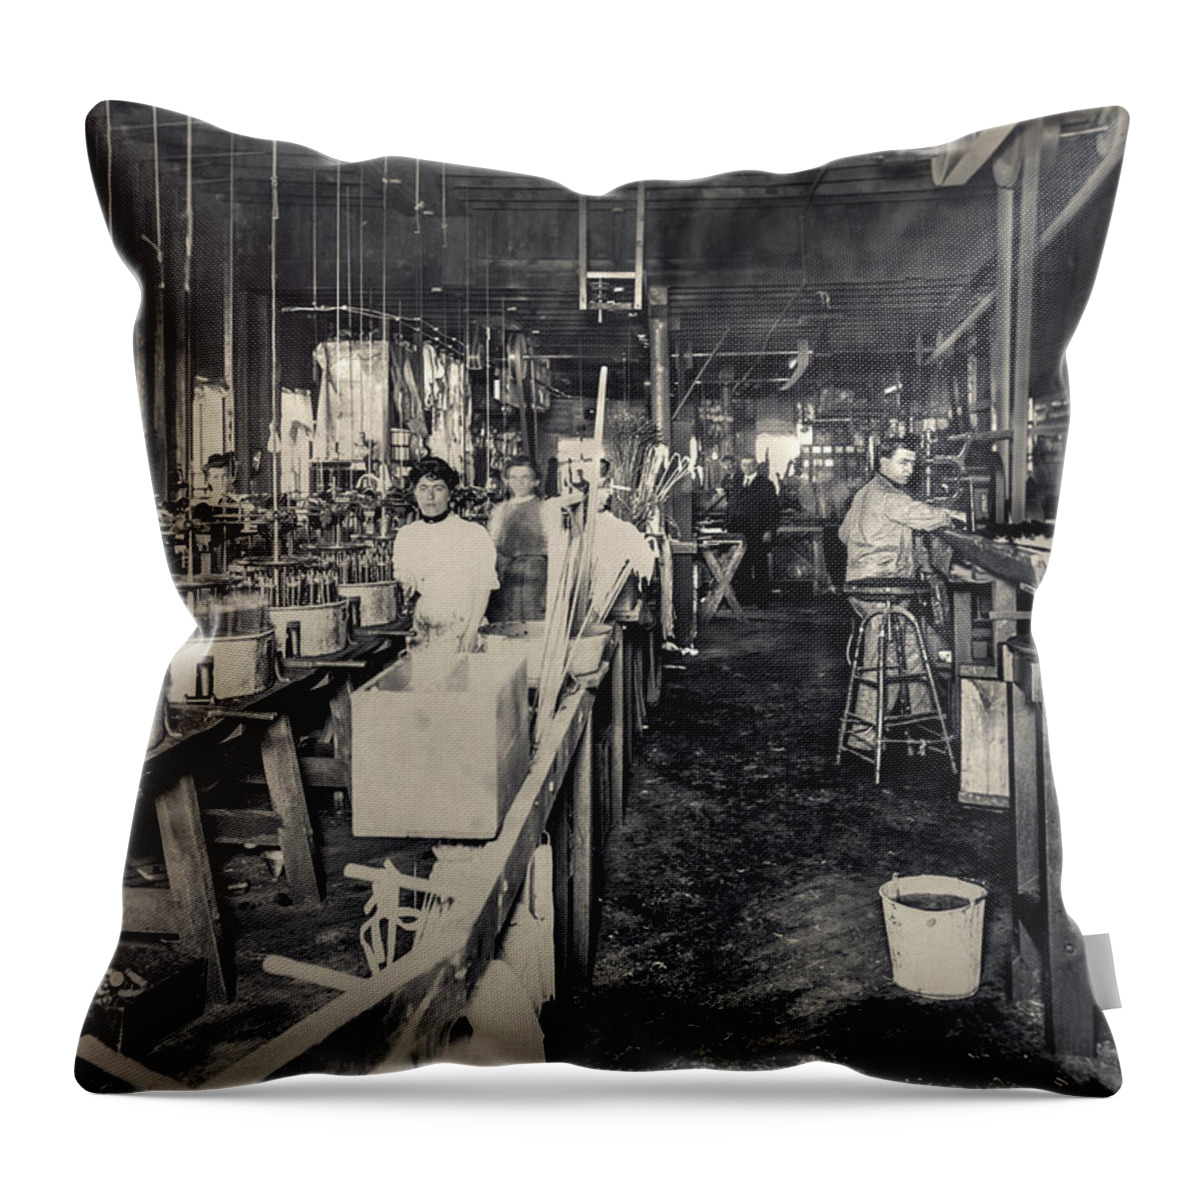 Labor Throw Pillow featuring the photograph The Work Place by Ray Congrove